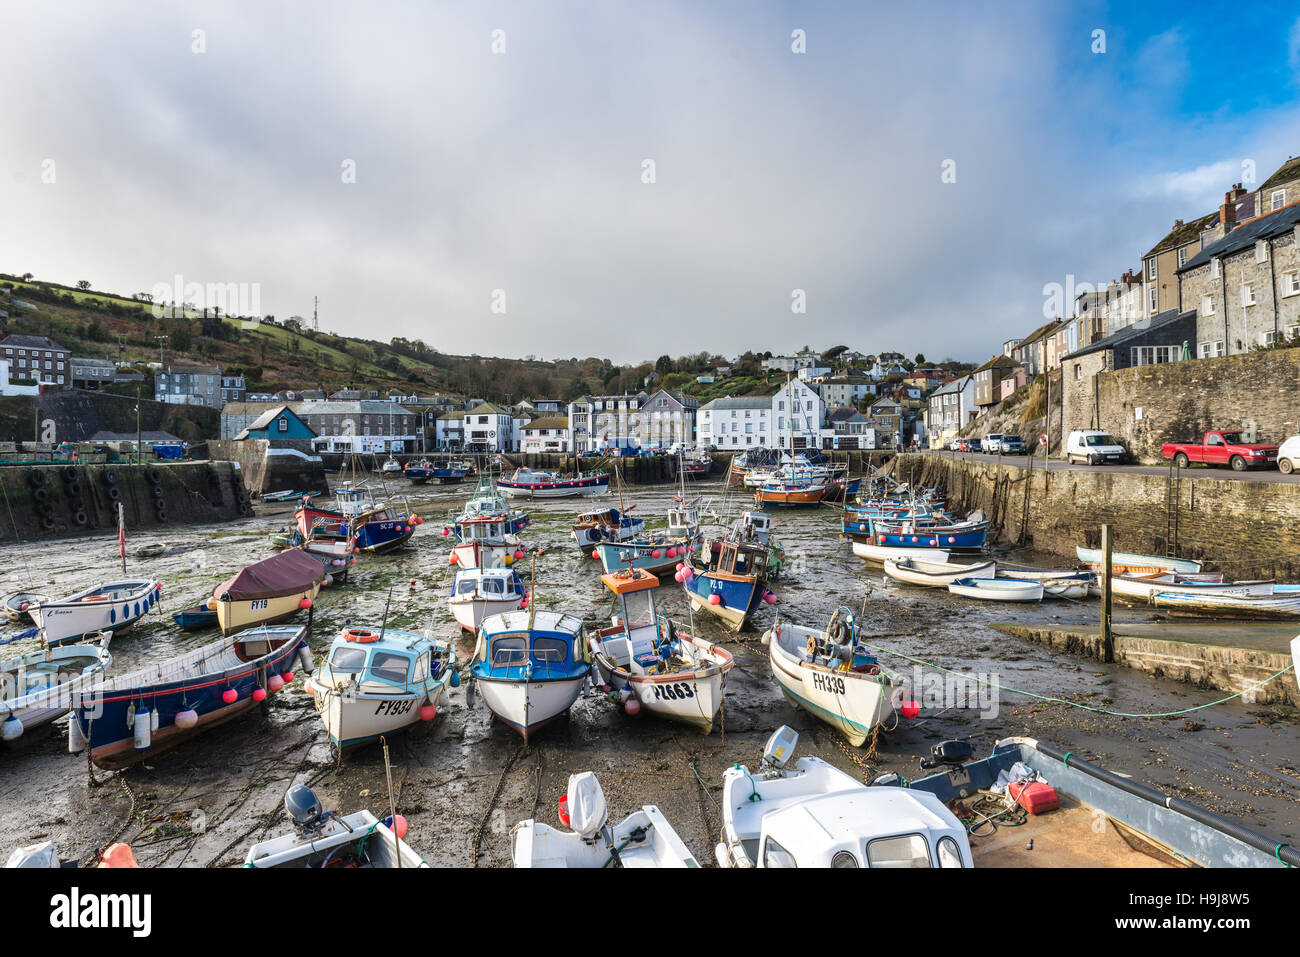 A pretty harbour of fishing boats surrounded by buildings in Mevagissey, Cornwall under a threatening sky. Stock Photo